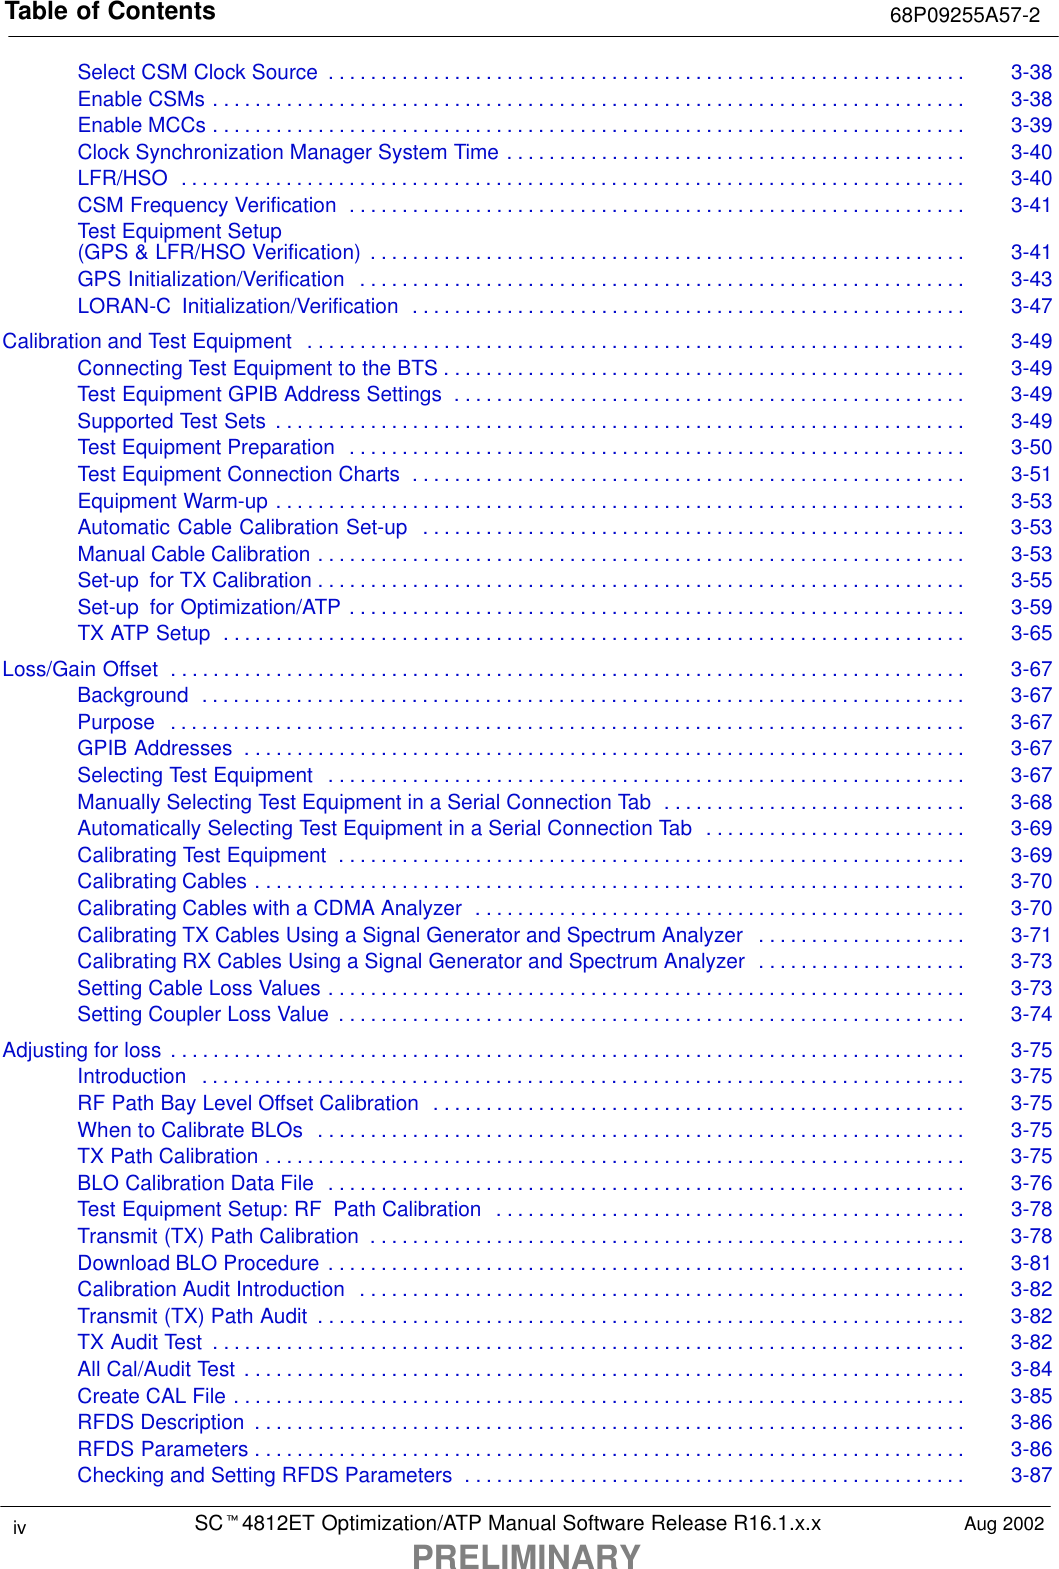 Table of Contents 68P09255A57-2SCt4812ET Optimization/ATP Manual Software Release R16.1.x.xPRELIMINARYiv Aug 2002Select CSM Clock Source 3-38. . . . . . . . . . . . . . . . . . . . . . . . . . . . . . . . . . . . . . . . . . . . . . . . . . . . . . . . . . . . . Enable CSMs 3-38. . . . . . . . . . . . . . . . . . . . . . . . . . . . . . . . . . . . . . . . . . . . . . . . . . . . . . . . . . . . . . . . . . . . . . . . Enable MCCs 3-39. . . . . . . . . . . . . . . . . . . . . . . . . . . . . . . . . . . . . . . . . . . . . . . . . . . . . . . . . . . . . . . . . . . . . . . . Clock Synchronization Manager System Time 3-40. . . . . . . . . . . . . . . . . . . . . . . . . . . . . . . . . . . . . . . . . . . . LFR/HSO 3-40. . . . . . . . . . . . . . . . . . . . . . . . . . . . . . . . . . . . . . . . . . . . . . . . . . . . . . . . . . . . . . . . . . . . . . . . . . . CSM Frequency Verification 3-41. . . . . . . . . . . . . . . . . . . . . . . . . . . . . . . . . . . . . . . . . . . . . . . . . . . . . . . . . . . Test Equipment Setup (GPS &amp; LFR/HSO Verification) 3-41. . . . . . . . . . . . . . . . . . . . . . . . . . . . . . . . . . . . . . . . . . . . . . . . . . . . . . . . . GPS Initialization/Verification 3-43. . . . . . . . . . . . . . . . . . . . . . . . . . . . . . . . . . . . . . . . . . . . . . . . . . . . . . . . . . LORAN-C  Initialization/Verification 3-47. . . . . . . . . . . . . . . . . . . . . . . . . . . . . . . . . . . . . . . . . . . . . . . . . . . . . Calibration and Test Equipment 3-49. . . . . . . . . . . . . . . . . . . . . . . . . . . . . . . . . . . . . . . . . . . . . . . . . . . . . . . . . . . . . . . Connecting Test Equipment to the BTS 3-49. . . . . . . . . . . . . . . . . . . . . . . . . . . . . . . . . . . . . . . . . . . . . . . . . . Test Equipment GPIB Address Settings 3-49. . . . . . . . . . . . . . . . . . . . . . . . . . . . . . . . . . . . . . . . . . . . . . . . . Supported Test Sets 3-49. . . . . . . . . . . . . . . . . . . . . . . . . . . . . . . . . . . . . . . . . . . . . . . . . . . . . . . . . . . . . . . . . . Test Equipment Preparation 3-50. . . . . . . . . . . . . . . . . . . . . . . . . . . . . . . . . . . . . . . . . . . . . . . . . . . . . . . . . . . Test Equipment Connection Charts 3-51. . . . . . . . . . . . . . . . . . . . . . . . . . . . . . . . . . . . . . . . . . . . . . . . . . . . . Equipment Warm-up 3-53. . . . . . . . . . . . . . . . . . . . . . . . . . . . . . . . . . . . . . . . . . . . . . . . . . . . . . . . . . . . . . . . . . Automatic Cable Calibration Set-up 3-53. . . . . . . . . . . . . . . . . . . . . . . . . . . . . . . . . . . . . . . . . . . . . . . . . . . . Manual Cable Calibration 3-53. . . . . . . . . . . . . . . . . . . . . . . . . . . . . . . . . . . . . . . . . . . . . . . . . . . . . . . . . . . . . . Set-up  for TX Calibration 3-55. . . . . . . . . . . . . . . . . . . . . . . . . . . . . . . . . . . . . . . . . . . . . . . . . . . . . . . . . . . . . . Set-up  for Optimization/ATP 3-59. . . . . . . . . . . . . . . . . . . . . . . . . . . . . . . . . . . . . . . . . . . . . . . . . . . . . . . . . . . TX ATP Setup 3-65. . . . . . . . . . . . . . . . . . . . . . . . . . . . . . . . . . . . . . . . . . . . . . . . . . . . . . . . . . . . . . . . . . . . . . . Loss/Gain Offset 3-67. . . . . . . . . . . . . . . . . . . . . . . . . . . . . . . . . . . . . . . . . . . . . . . . . . . . . . . . . . . . . . . . . . . . . . . . . . . . Background 3-67. . . . . . . . . . . . . . . . . . . . . . . . . . . . . . . . . . . . . . . . . . . . . . . . . . . . . . . . . . . . . . . . . . . . . . . . . Purpose 3-67. . . . . . . . . . . . . . . . . . . . . . . . . . . . . . . . . . . . . . . . . . . . . . . . . . . . . . . . . . . . . . . . . . . . . . . . . . . . GPIB Addresses 3-67. . . . . . . . . . . . . . . . . . . . . . . . . . . . . . . . . . . . . . . . . . . . . . . . . . . . . . . . . . . . . . . . . . . . . Selecting Test Equipment 3-67. . . . . . . . . . . . . . . . . . . . . . . . . . . . . . . . . . . . . . . . . . . . . . . . . . . . . . . . . . . . . Manually Selecting Test Equipment in a Serial Connection Tab 3-68. . . . . . . . . . . . . . . . . . . . . . . . . . . . . Automatically Selecting Test Equipment in a Serial Connection Tab 3-69. . . . . . . . . . . . . . . . . . . . . . . . . Calibrating Test Equipment 3-69. . . . . . . . . . . . . . . . . . . . . . . . . . . . . . . . . . . . . . . . . . . . . . . . . . . . . . . . . . . . Calibrating Cables 3-70. . . . . . . . . . . . . . . . . . . . . . . . . . . . . . . . . . . . . . . . . . . . . . . . . . . . . . . . . . . . . . . . . . . . Calibrating Cables with a CDMA Analyzer 3-70. . . . . . . . . . . . . . . . . . . . . . . . . . . . . . . . . . . . . . . . . . . . . . . Calibrating TX Cables Using a Signal Generator and Spectrum Analyzer 3-71. . . . . . . . . . . . . . . . . . . . Calibrating RX Cables Using a Signal Generator and Spectrum Analyzer 3-73. . . . . . . . . . . . . . . . . . . . Setting Cable Loss Values 3-73. . . . . . . . . . . . . . . . . . . . . . . . . . . . . . . . . . . . . . . . . . . . . . . . . . . . . . . . . . . . . Setting Coupler Loss Value 3-74. . . . . . . . . . . . . . . . . . . . . . . . . . . . . . . . . . . . . . . . . . . . . . . . . . . . . . . . . . . . Adjusting for loss 3-75. . . . . . . . . . . . . . . . . . . . . . . . . . . . . . . . . . . . . . . . . . . . . . . . . . . . . . . . . . . . . . . . . . . . . . . . . . . . Introduction 3-75. . . . . . . . . . . . . . . . . . . . . . . . . . . . . . . . . . . . . . . . . . . . . . . . . . . . . . . . . . . . . . . . . . . . . . . . . RF Path Bay Level Offset Calibration 3-75. . . . . . . . . . . . . . . . . . . . . . . . . . . . . . . . . . . . . . . . . . . . . . . . . . . When to Calibrate BLOs 3-75. . . . . . . . . . . . . . . . . . . . . . . . . . . . . . . . . . . . . . . . . . . . . . . . . . . . . . . . . . . . . . TX Path Calibration 3-75. . . . . . . . . . . . . . . . . . . . . . . . . . . . . . . . . . . . . . . . . . . . . . . . . . . . . . . . . . . . . . . . . . . BLO Calibration Data File 3-76. . . . . . . . . . . . . . . . . . . . . . . . . . . . . . . . . . . . . . . . . . . . . . . . . . . . . . . . . . . . . Test Equipment Setup: RF Path Calibration 3-78. . . . . . . . . . . . . . . . . . . . . . . . . . . . . . . . . . . . . . . . . . . . . Transmit (TX) Path Calibration 3-78. . . . . . . . . . . . . . . . . . . . . . . . . . . . . . . . . . . . . . . . . . . . . . . . . . . . . . . . . Download BLO Procedure 3-81. . . . . . . . . . . . . . . . . . . . . . . . . . . . . . . . . . . . . . . . . . . . . . . . . . . . . . . . . . . . . Calibration Audit Introduction 3-82. . . . . . . . . . . . . . . . . . . . . . . . . . . . . . . . . . . . . . . . . . . . . . . . . . . . . . . . . . Transmit (TX) Path Audit 3-82. . . . . . . . . . . . . . . . . . . . . . . . . . . . . . . . . . . . . . . . . . . . . . . . . . . . . . . . . . . . . . TX Audit Test 3-82. . . . . . . . . . . . . . . . . . . . . . . . . . . . . . . . . . . . . . . . . . . . . . . . . . . . . . . . . . . . . . . . . . . . . . . . All Cal/Audit Test 3-84. . . . . . . . . . . . . . . . . . . . . . . . . . . . . . . . . . . . . . . . . . . . . . . . . . . . . . . . . . . . . . . . . . . . . Create CAL File 3-85. . . . . . . . . . . . . . . . . . . . . . . . . . . . . . . . . . . . . . . . . . . . . . . . . . . . . . . . . . . . . . . . . . . . . . RFDS Description 3-86. . . . . . . . . . . . . . . . . . . . . . . . . . . . . . . . . . . . . . . . . . . . . . . . . . . . . . . . . . . . . . . . . . . . RFDS Parameters 3-86. . . . . . . . . . . . . . . . . . . . . . . . . . . . . . . . . . . . . . . . . . . . . . . . . . . . . . . . . . . . . . . . . . . . Checking and Setting RFDS Parameters 3-87. . . . . . . . . . . . . . . . . . . . . . . . . . . . . . . . . . . . . . . . . . . . . . . . 